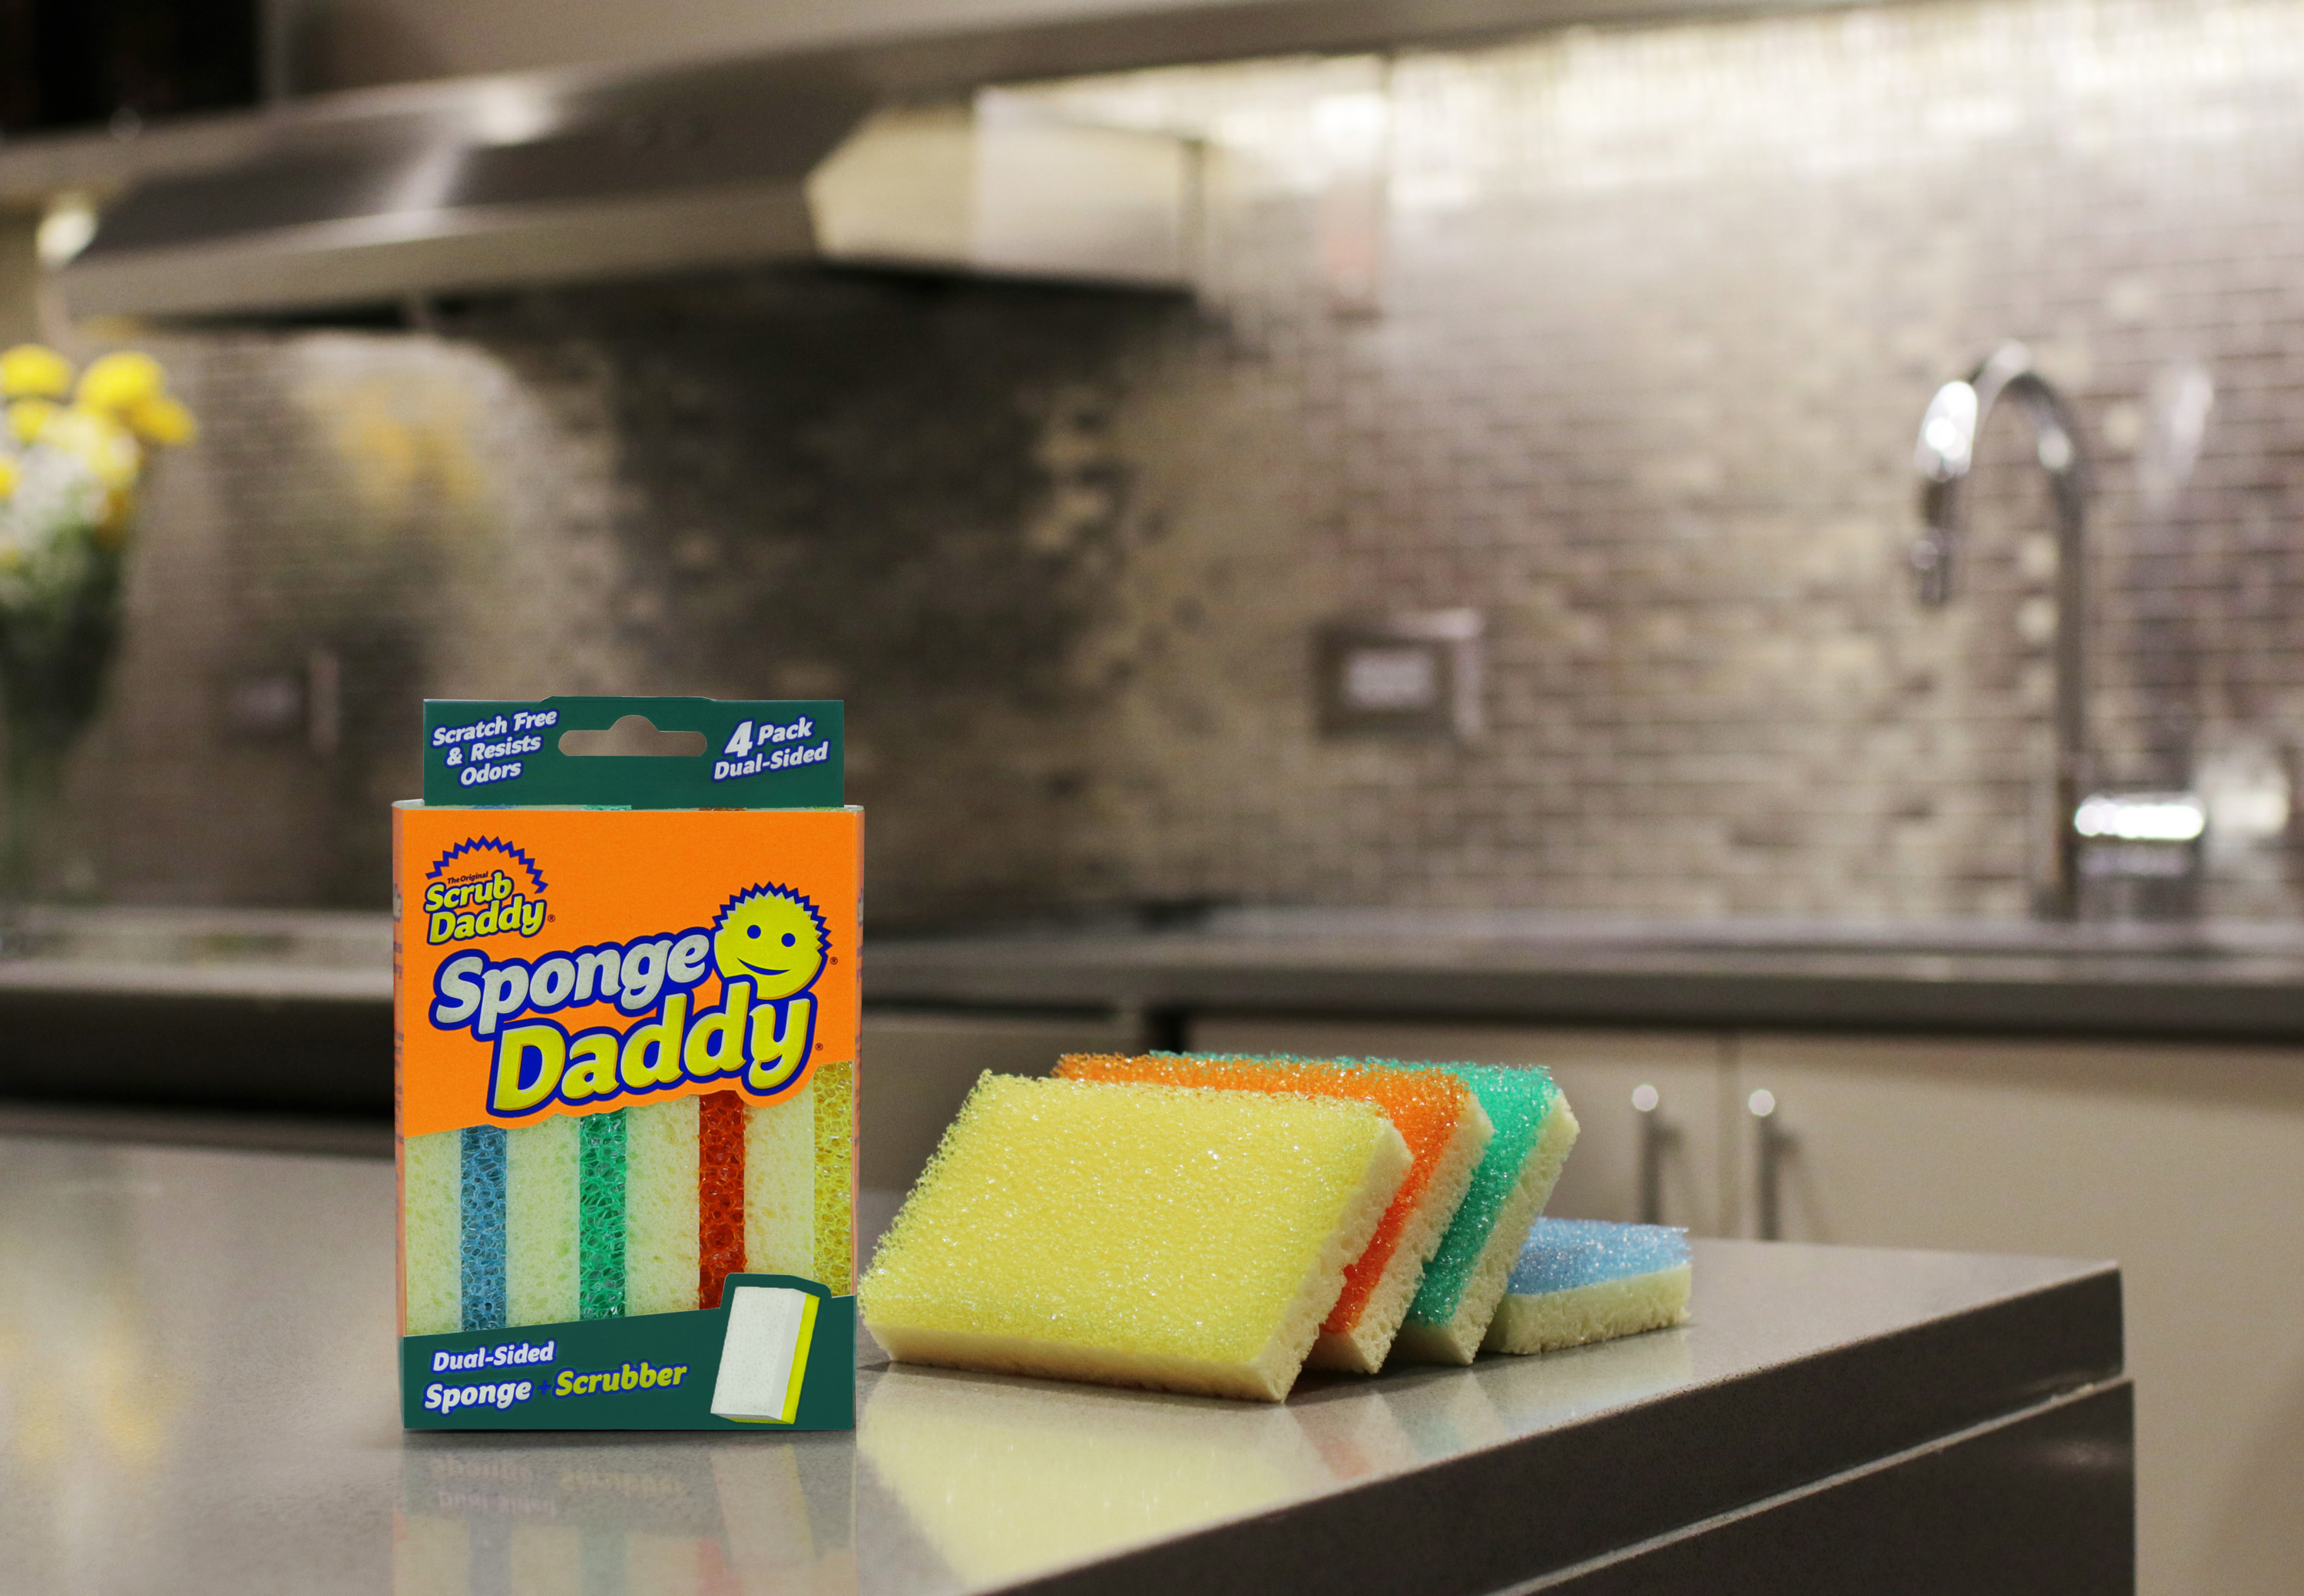 The sponges, which are rectangular, with one softer foam side, and one scrubbing side